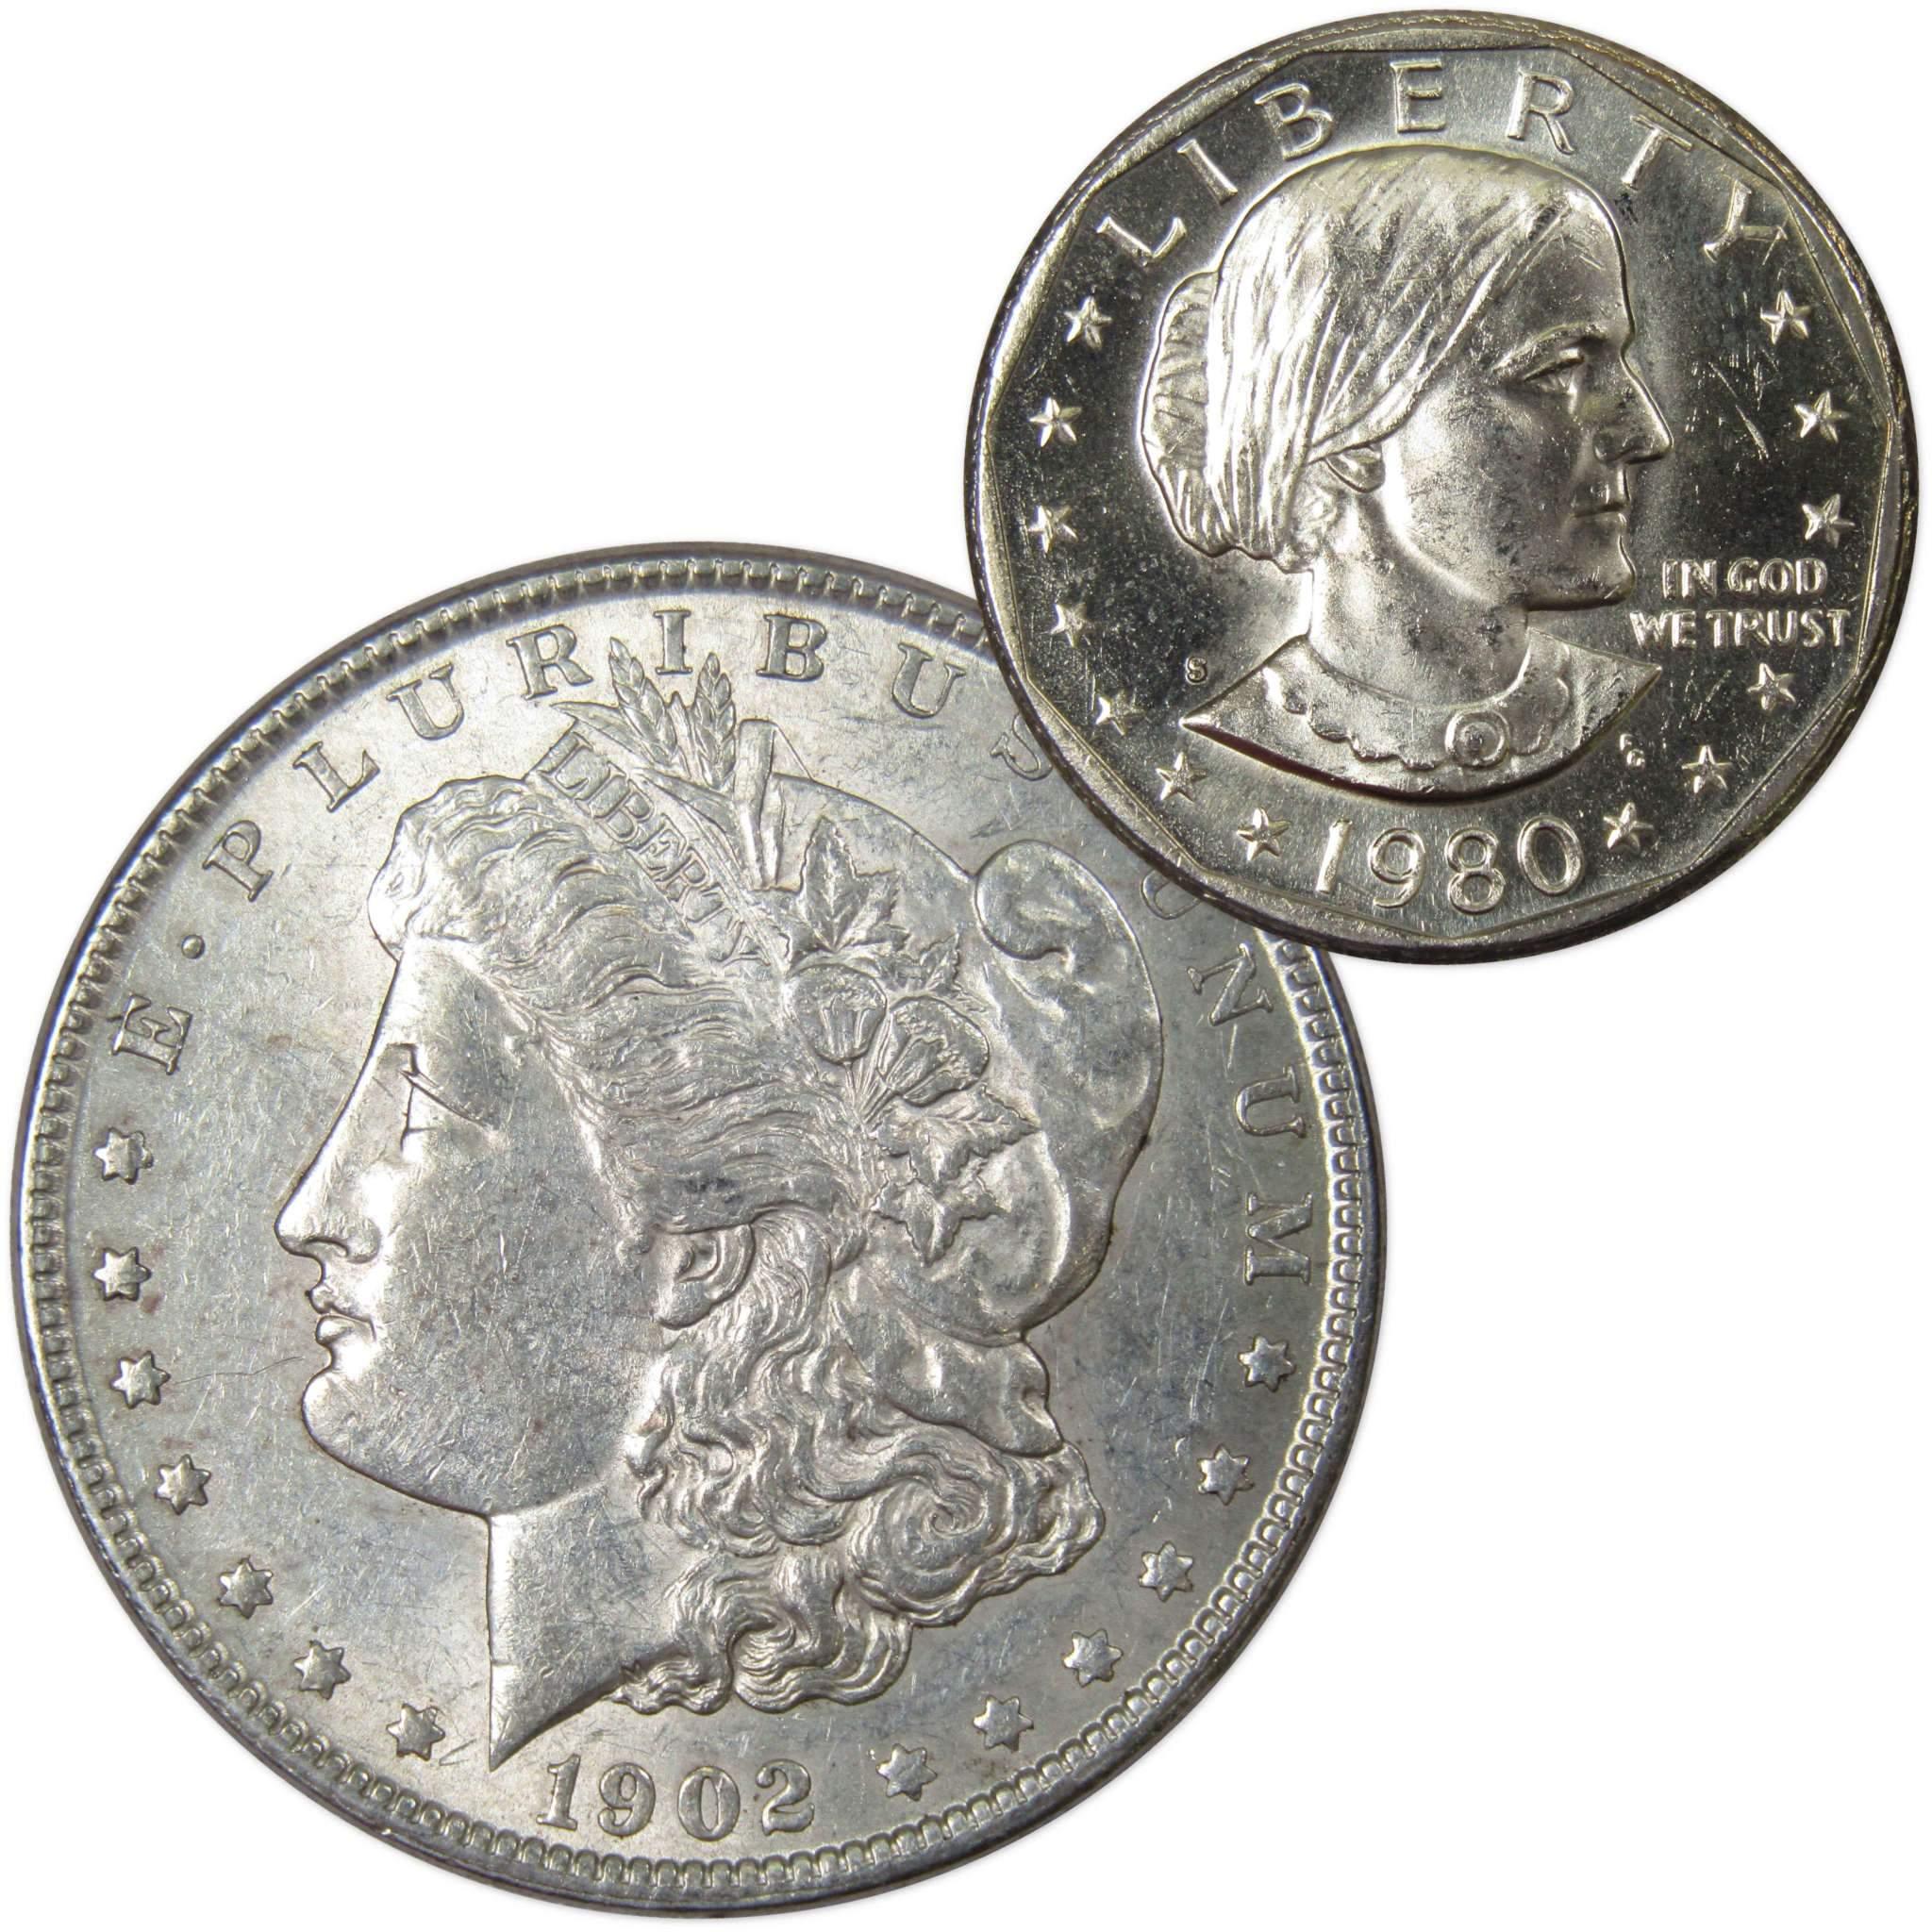 1902 O Morgan Dollar AU About Uncirculated with 1980 S SBA$ BU Uncirculated - Morgan coin - Morgan silver dollar - Morgan silver dollar for sale - Profile Coins &amp; Collectibles